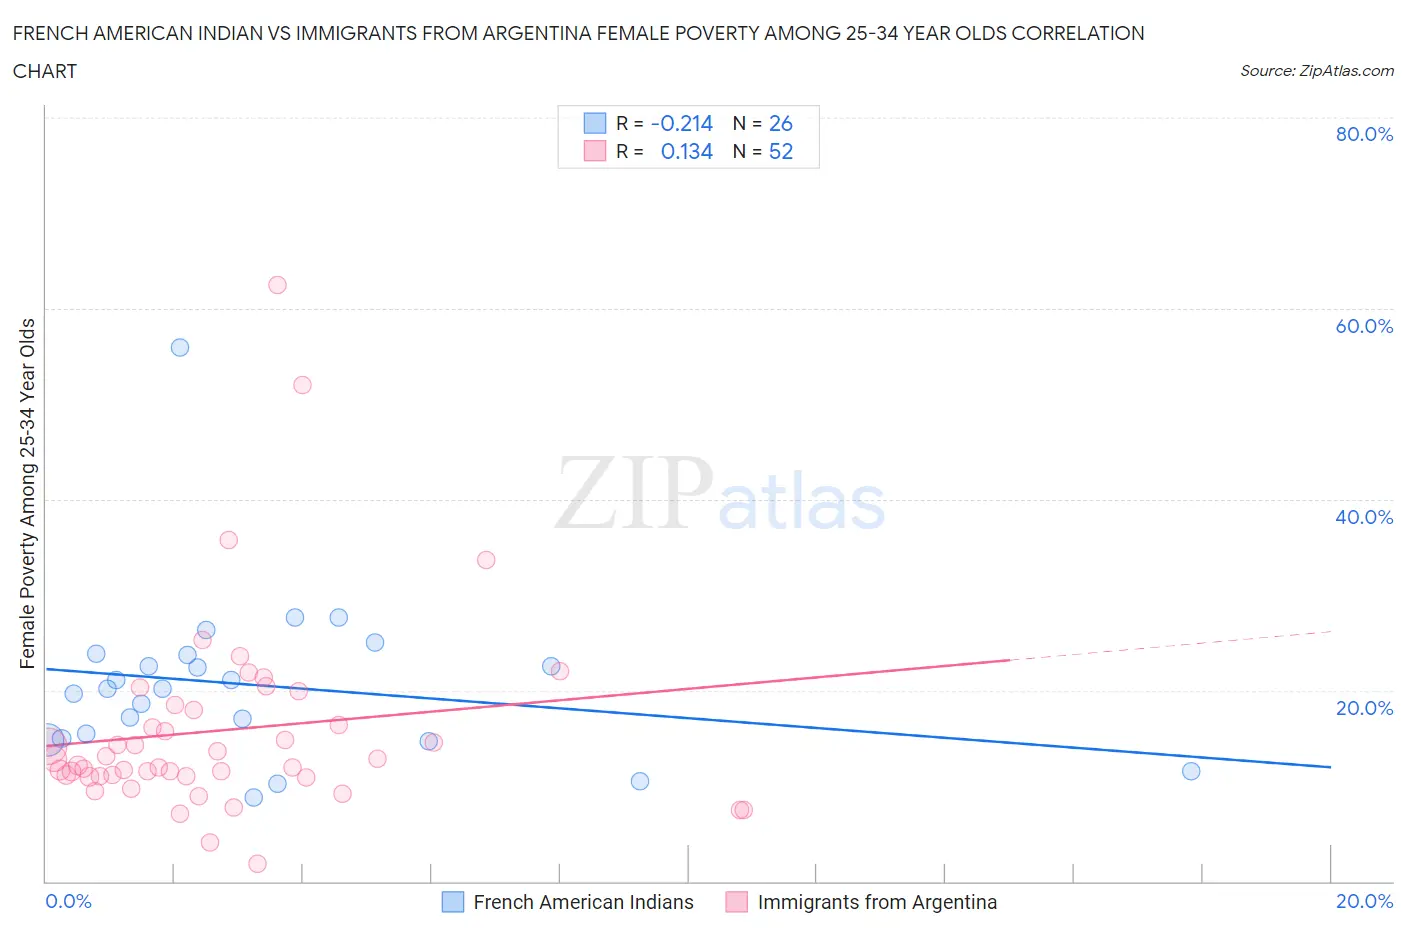 French American Indian vs Immigrants from Argentina Female Poverty Among 25-34 Year Olds